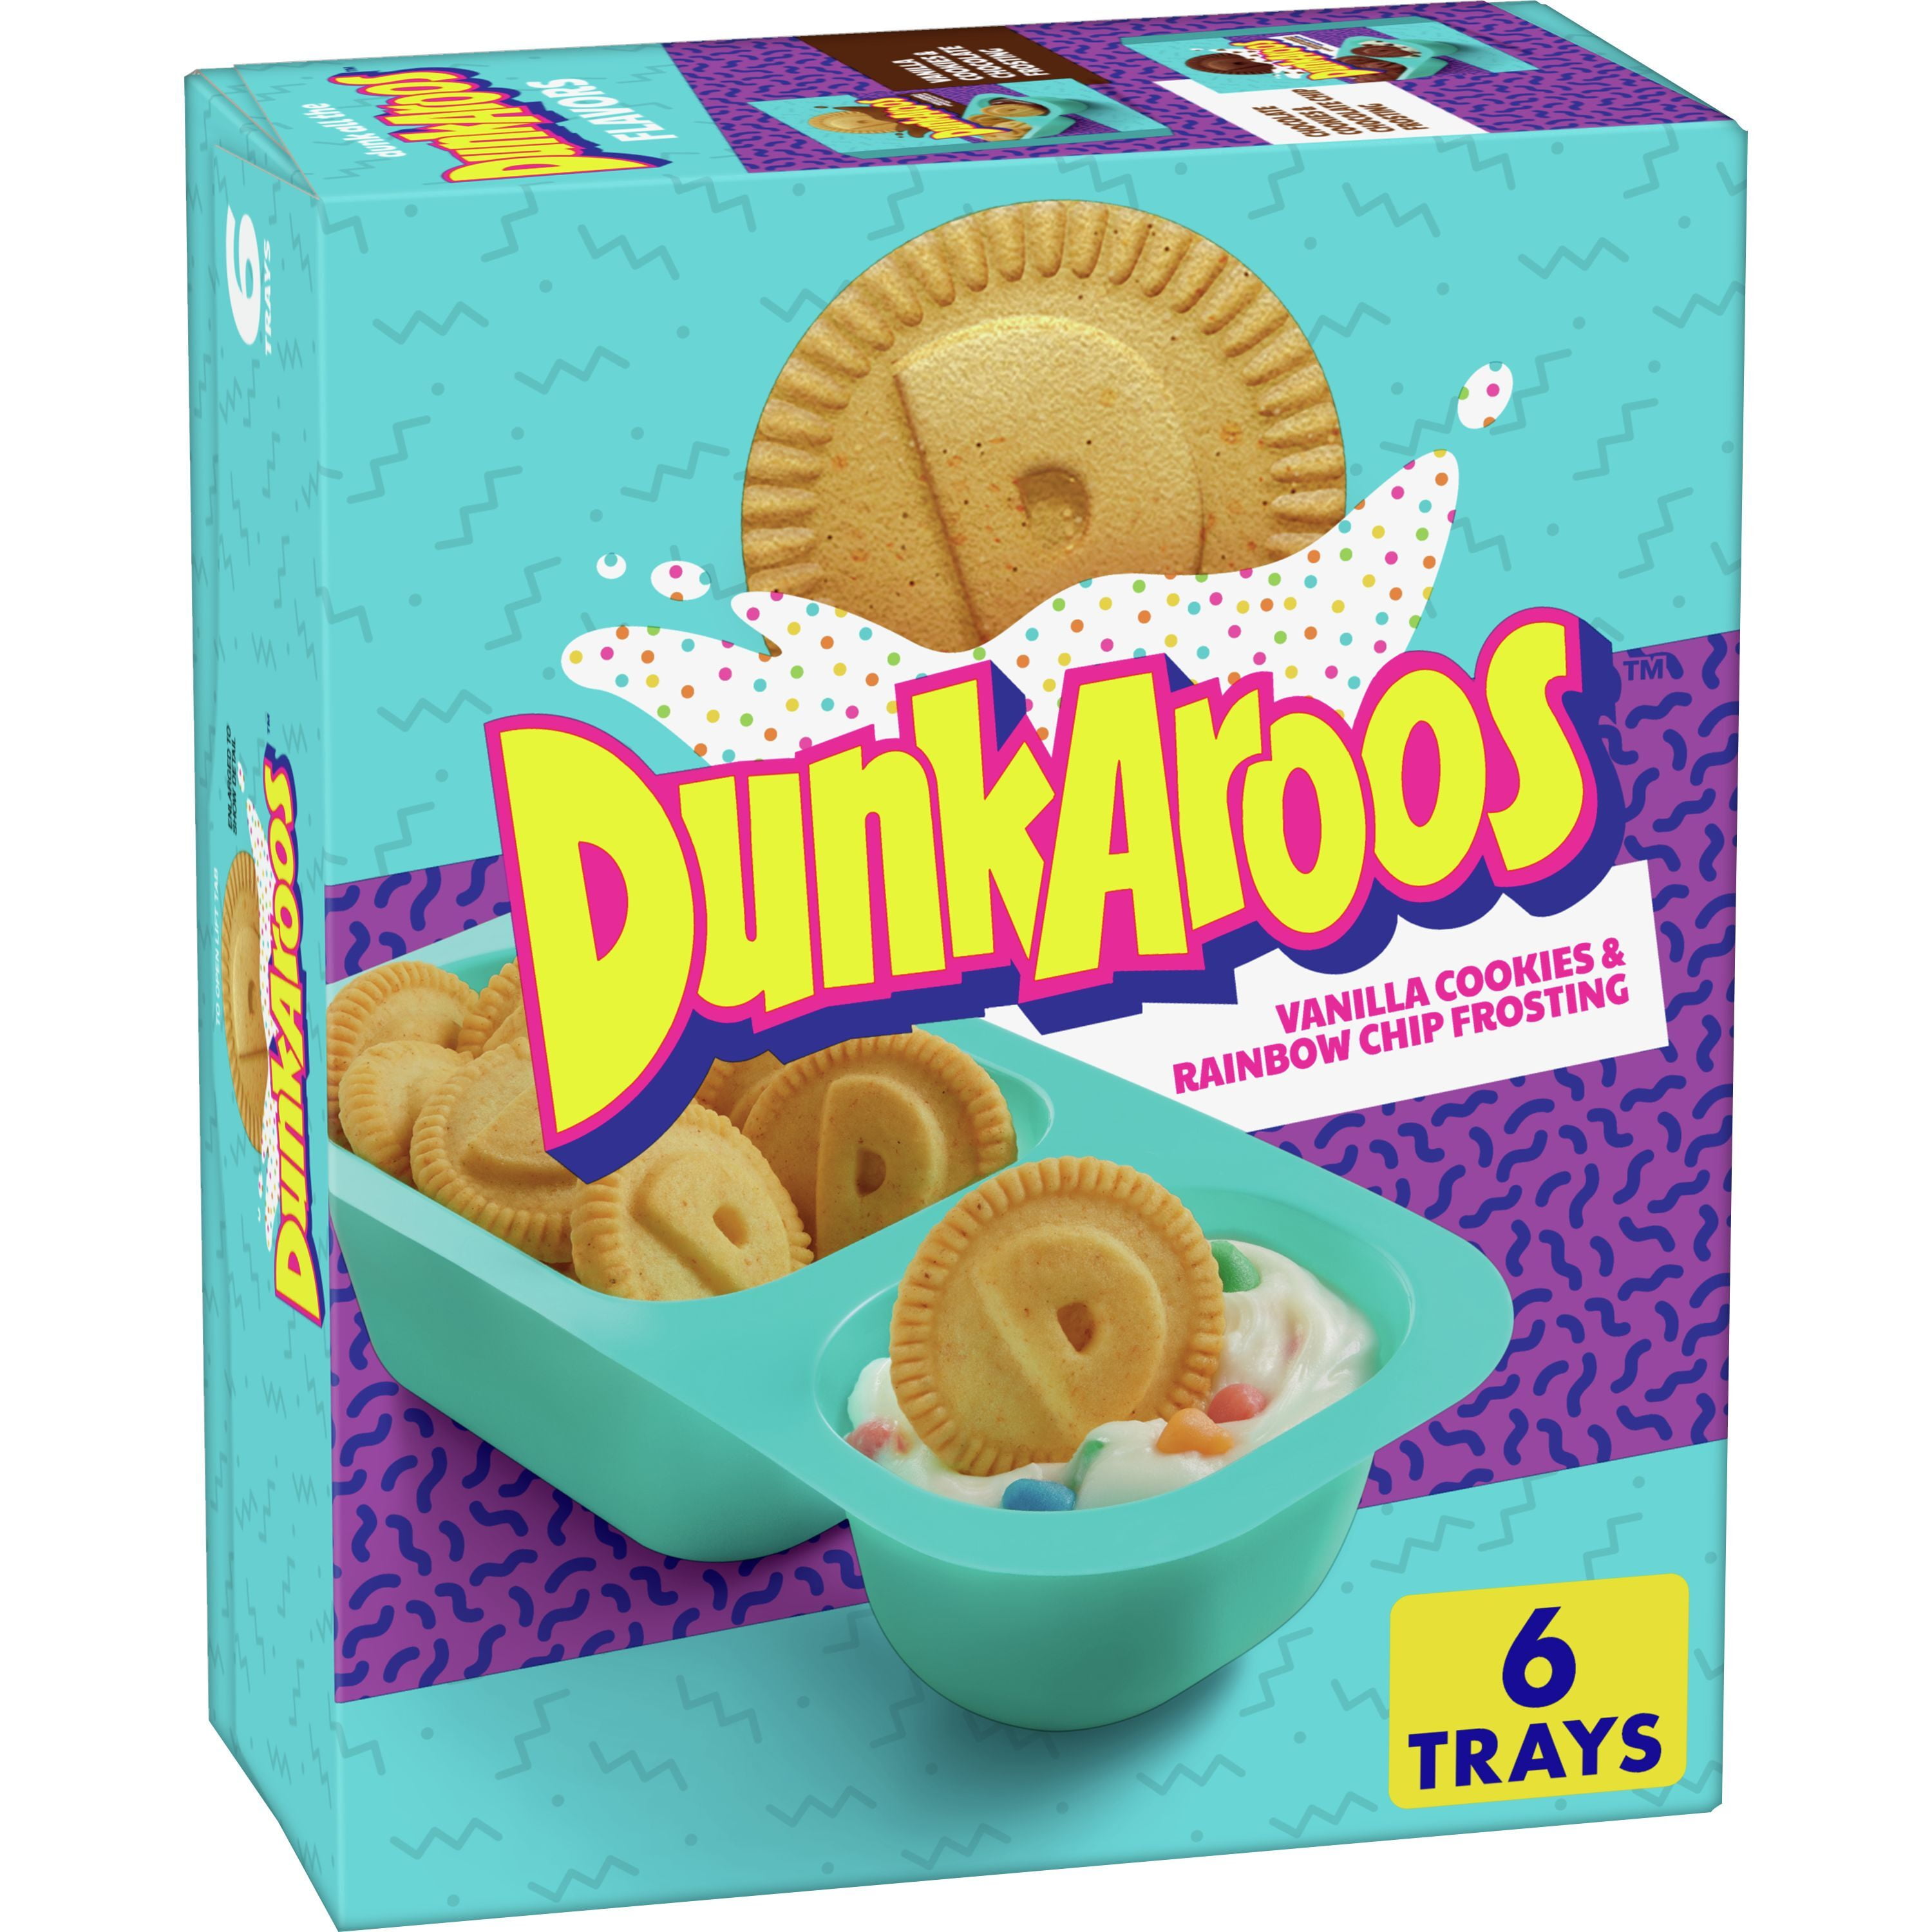 Dunkaroos Vanilla Cookies and Rainbow Chip Frosting, 1 oz, 6 ct